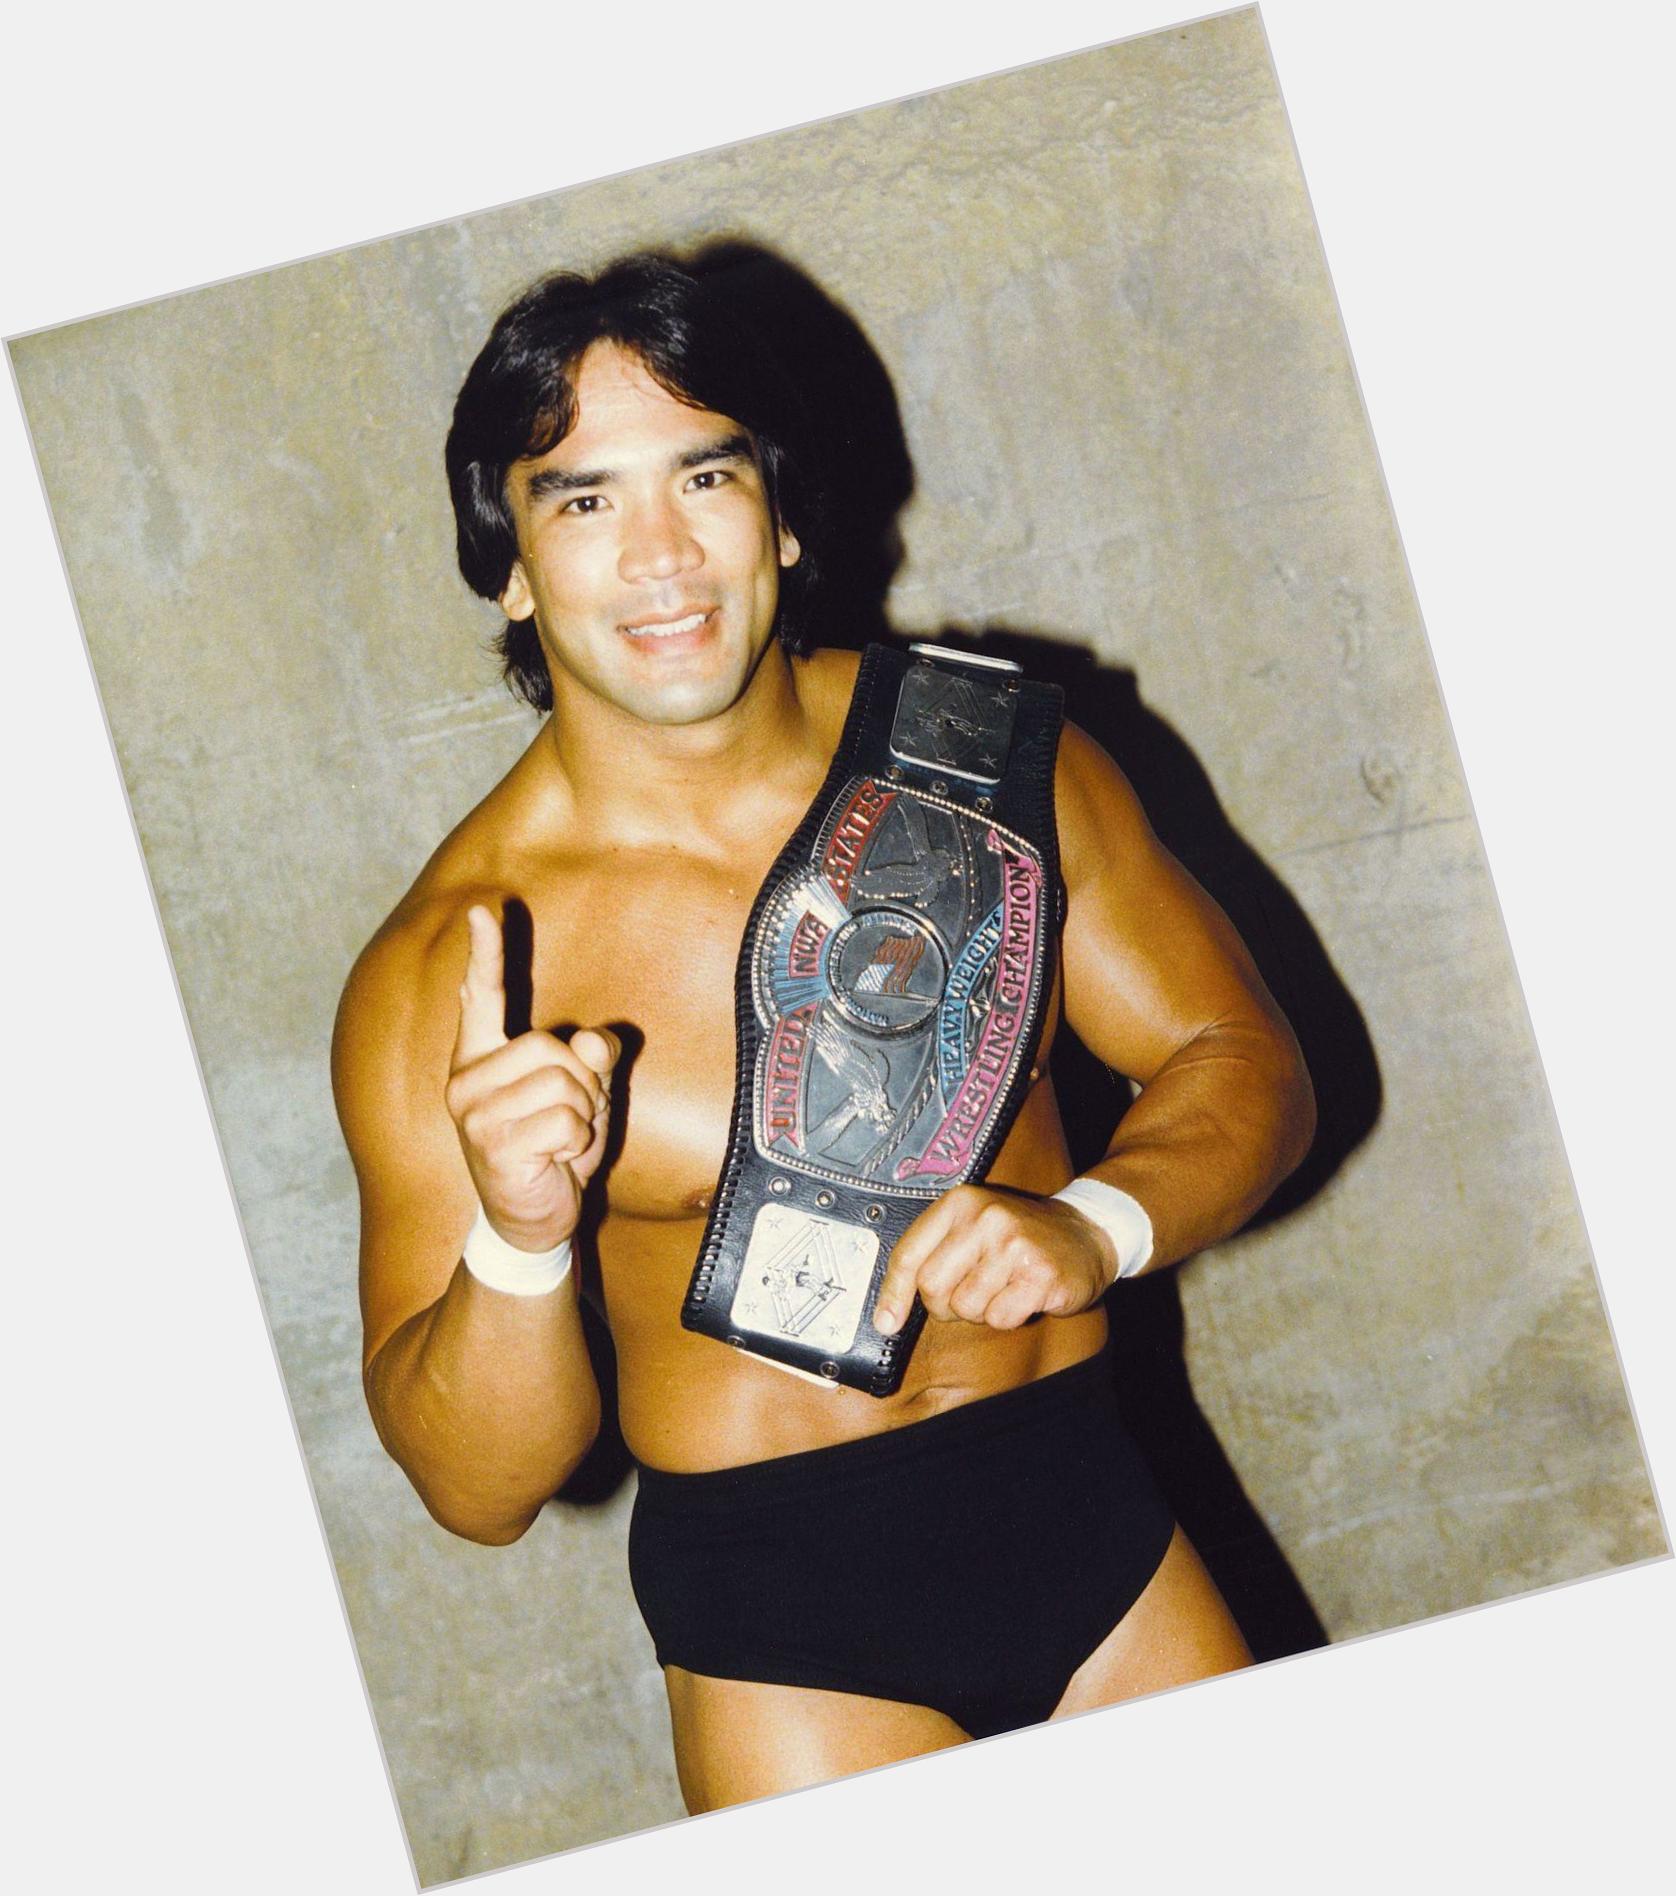 Https://fanpagepress.net/m/R/Ricky Steamboat Exclusive Hot Pic 3